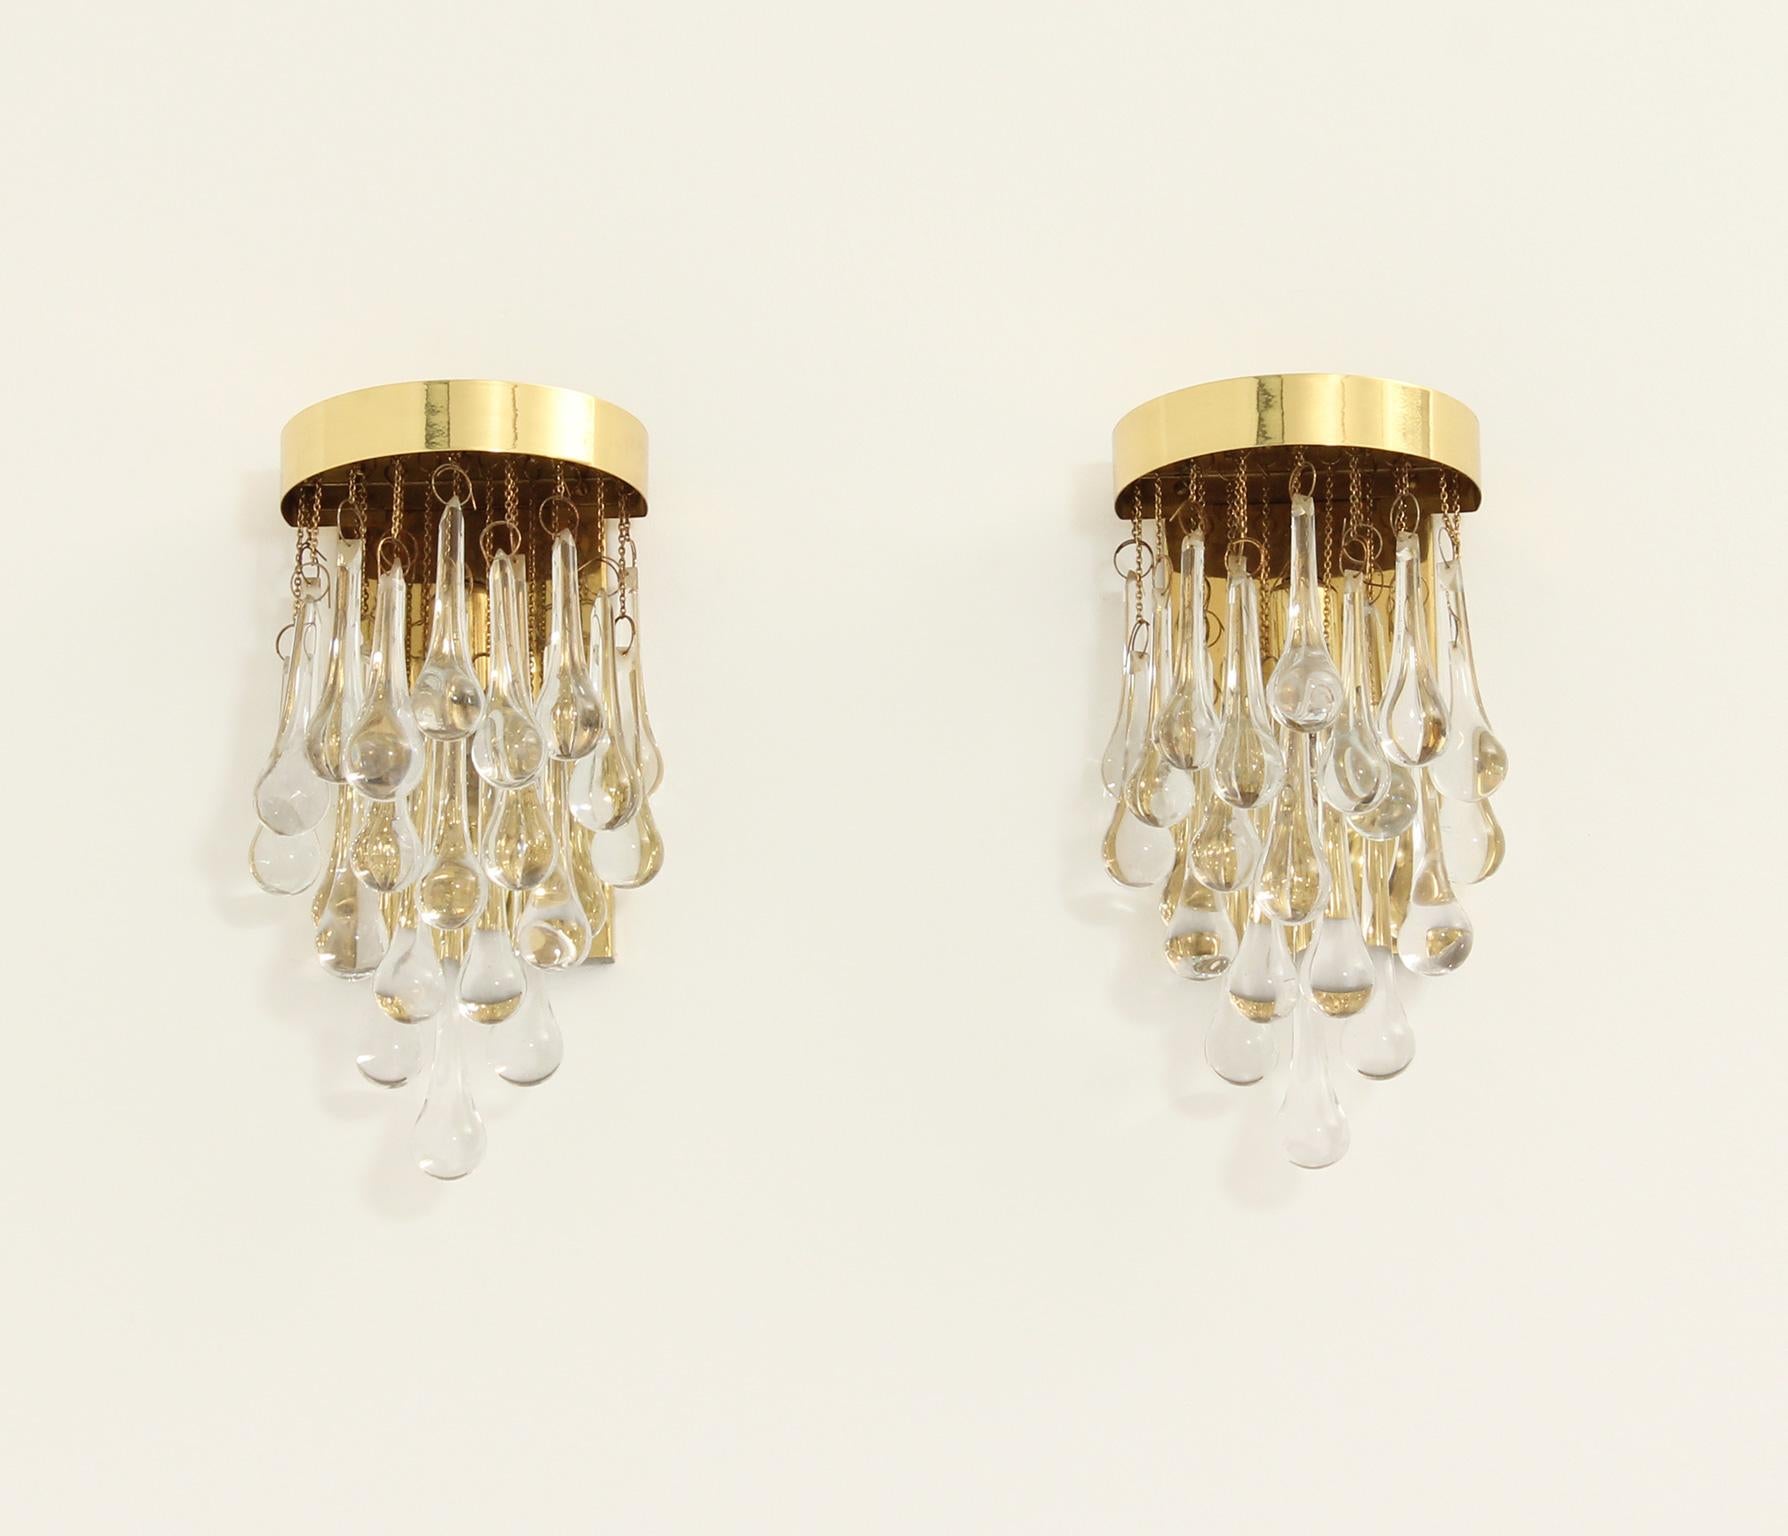 Pair of glass teardrop sconces from 1970's by Lumica, Spain. Brass structure with teardrops in clear glass.